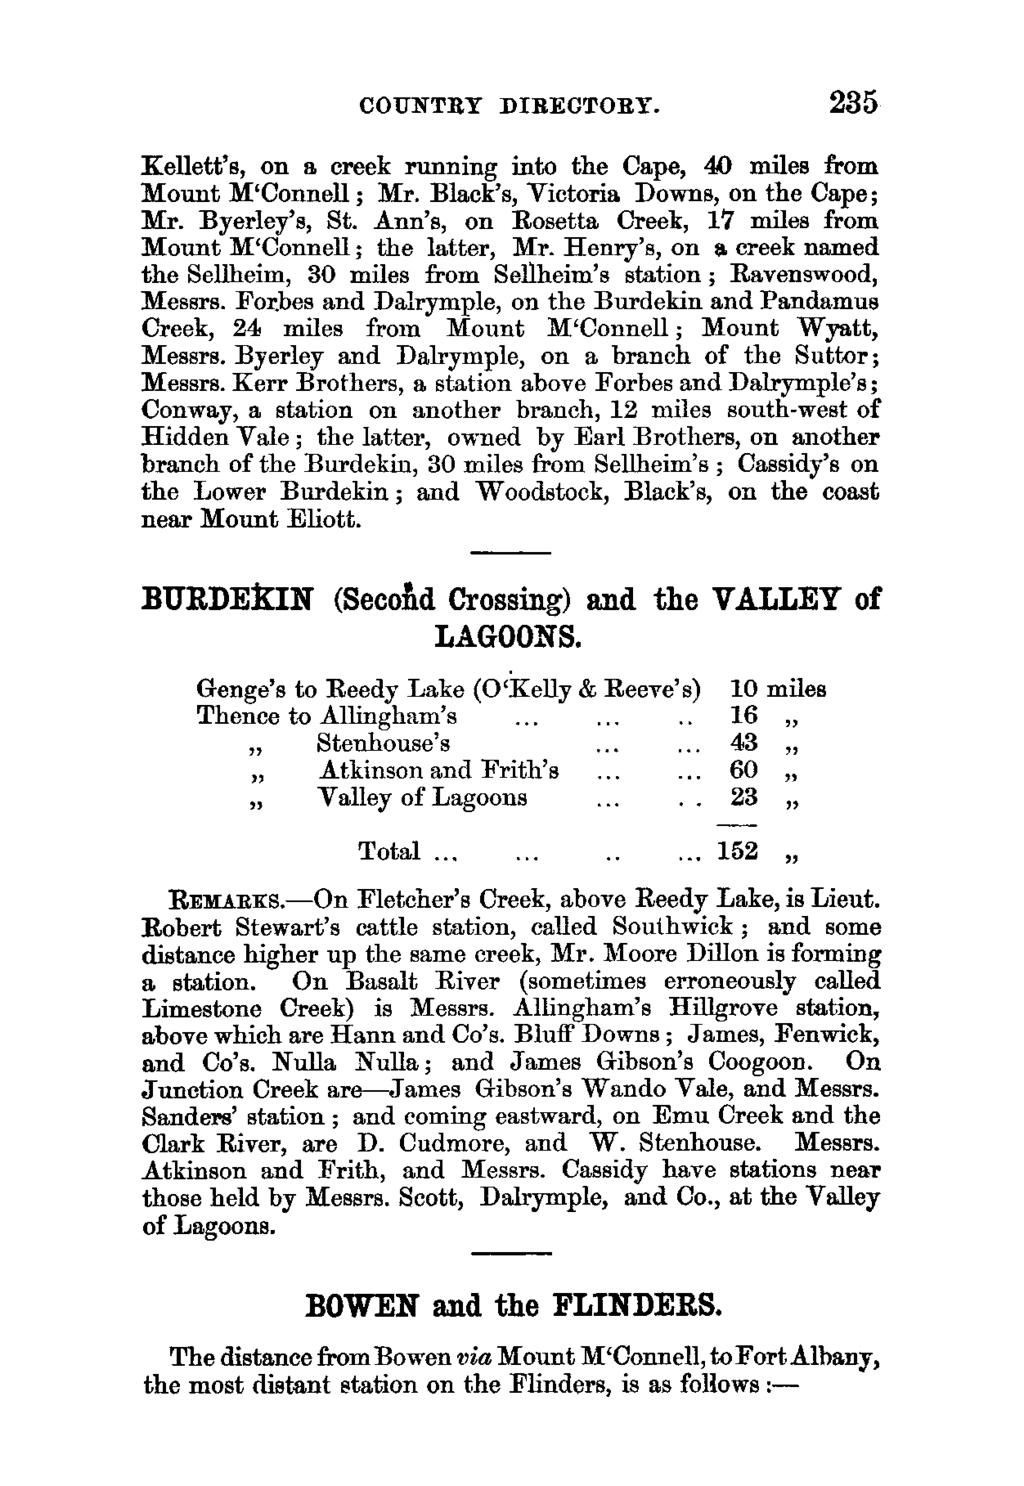 COUNTRY DIRECTORY. 235 Xellett's, on a creek running into the Cape, 40 miles from Mount M'Connell; Mr. Black's, Victoria Downs, on the Cape; Mr. Byerley's, St.